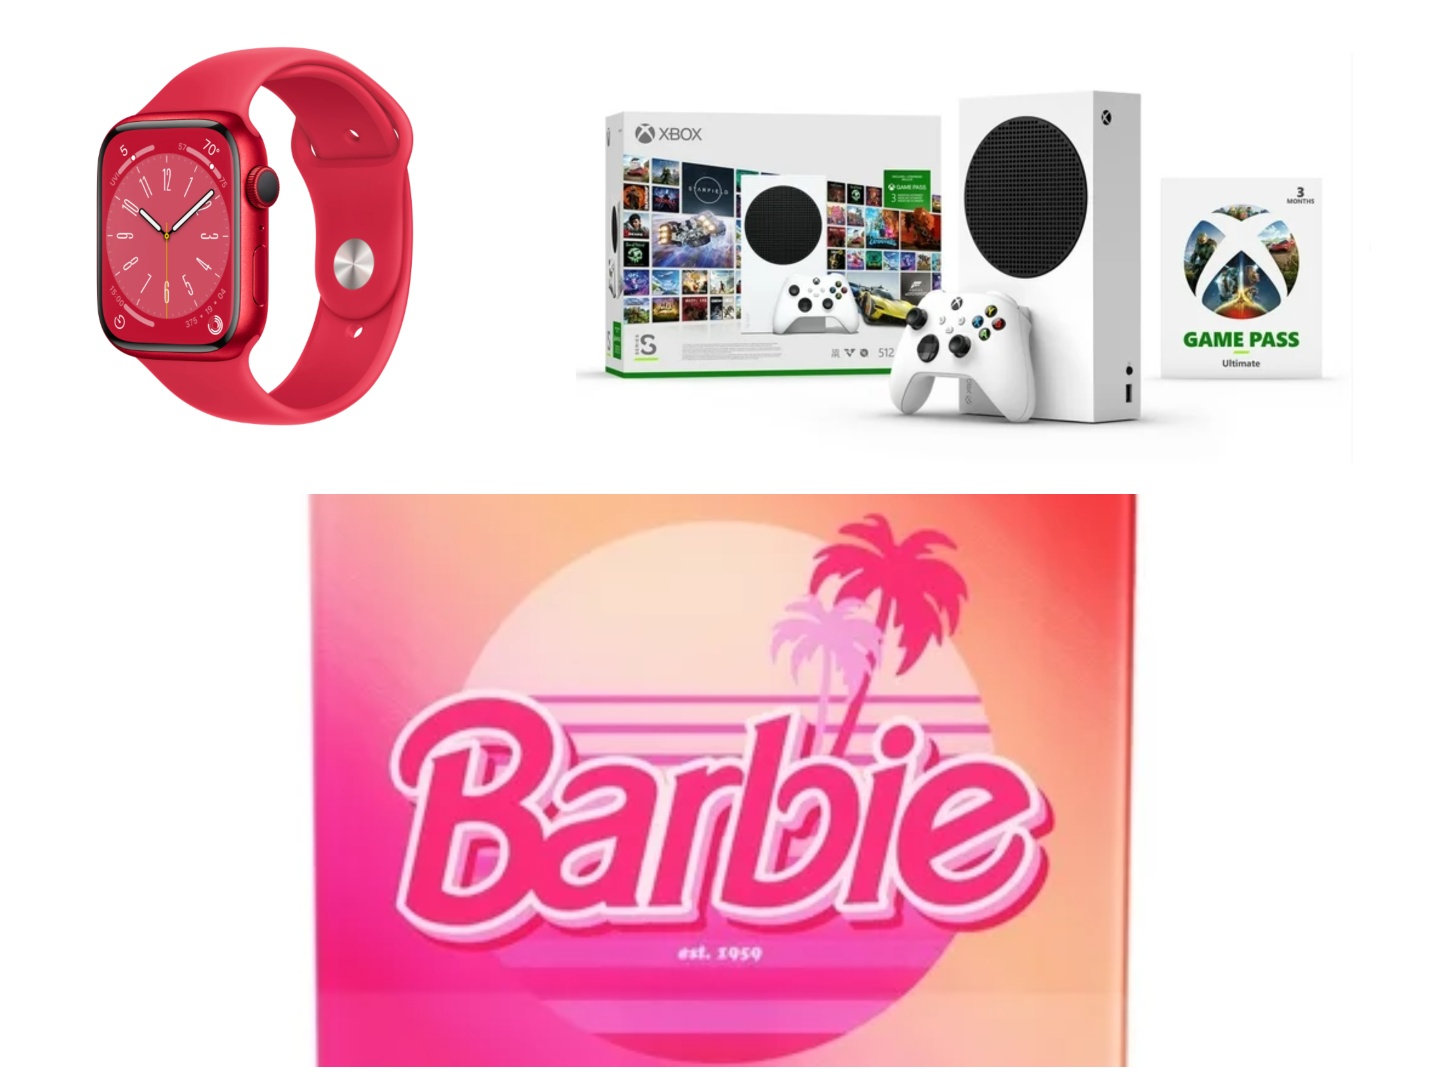 Walmart Flash Deals have up to 65% off Apple Watch, Lego and Xbox Series S